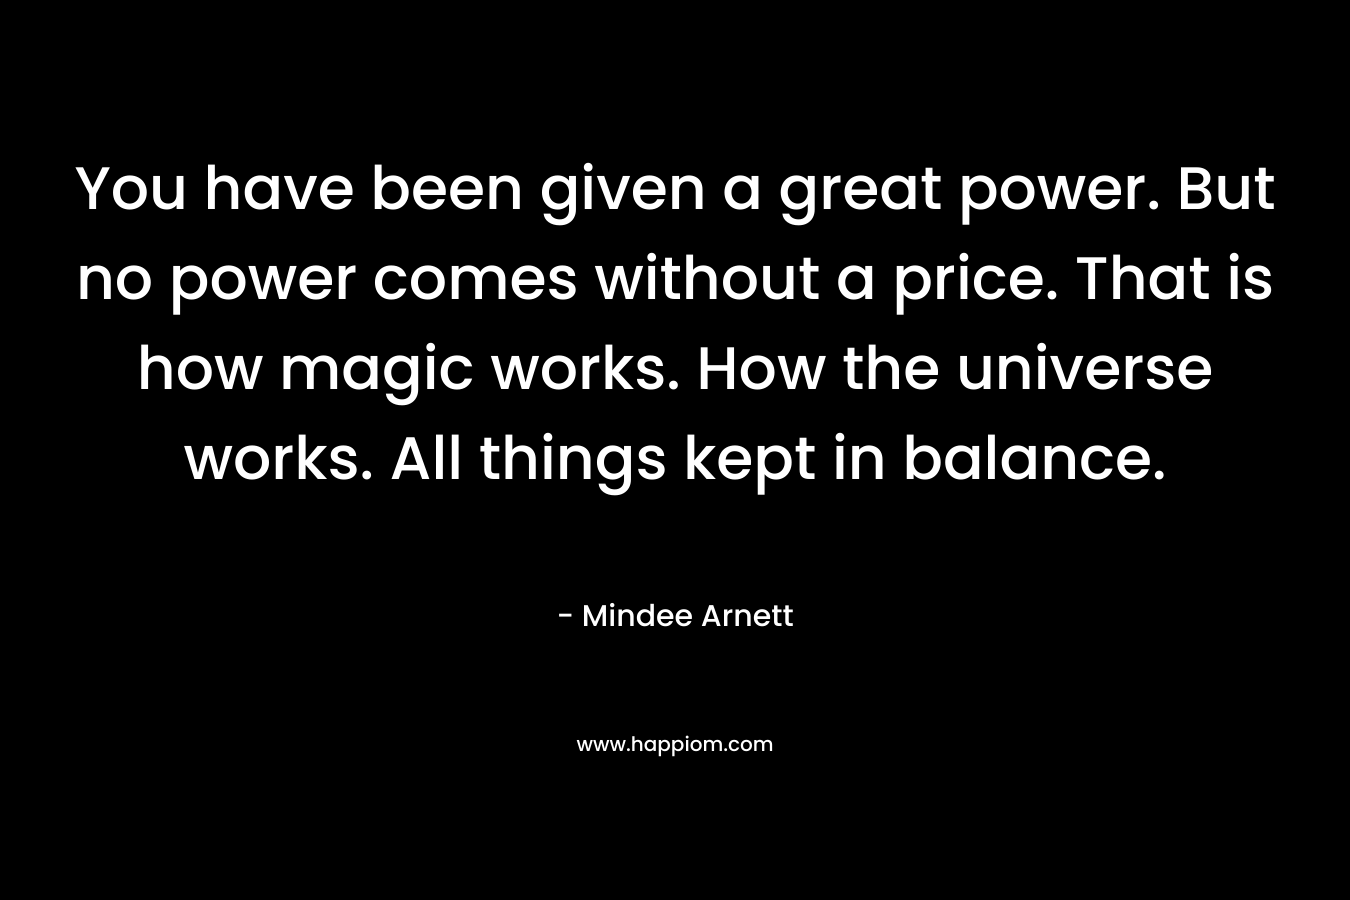 You have been given a great power. But no power comes without a price. That is how magic works. How the universe works. All things kept in balance. – Mindee Arnett